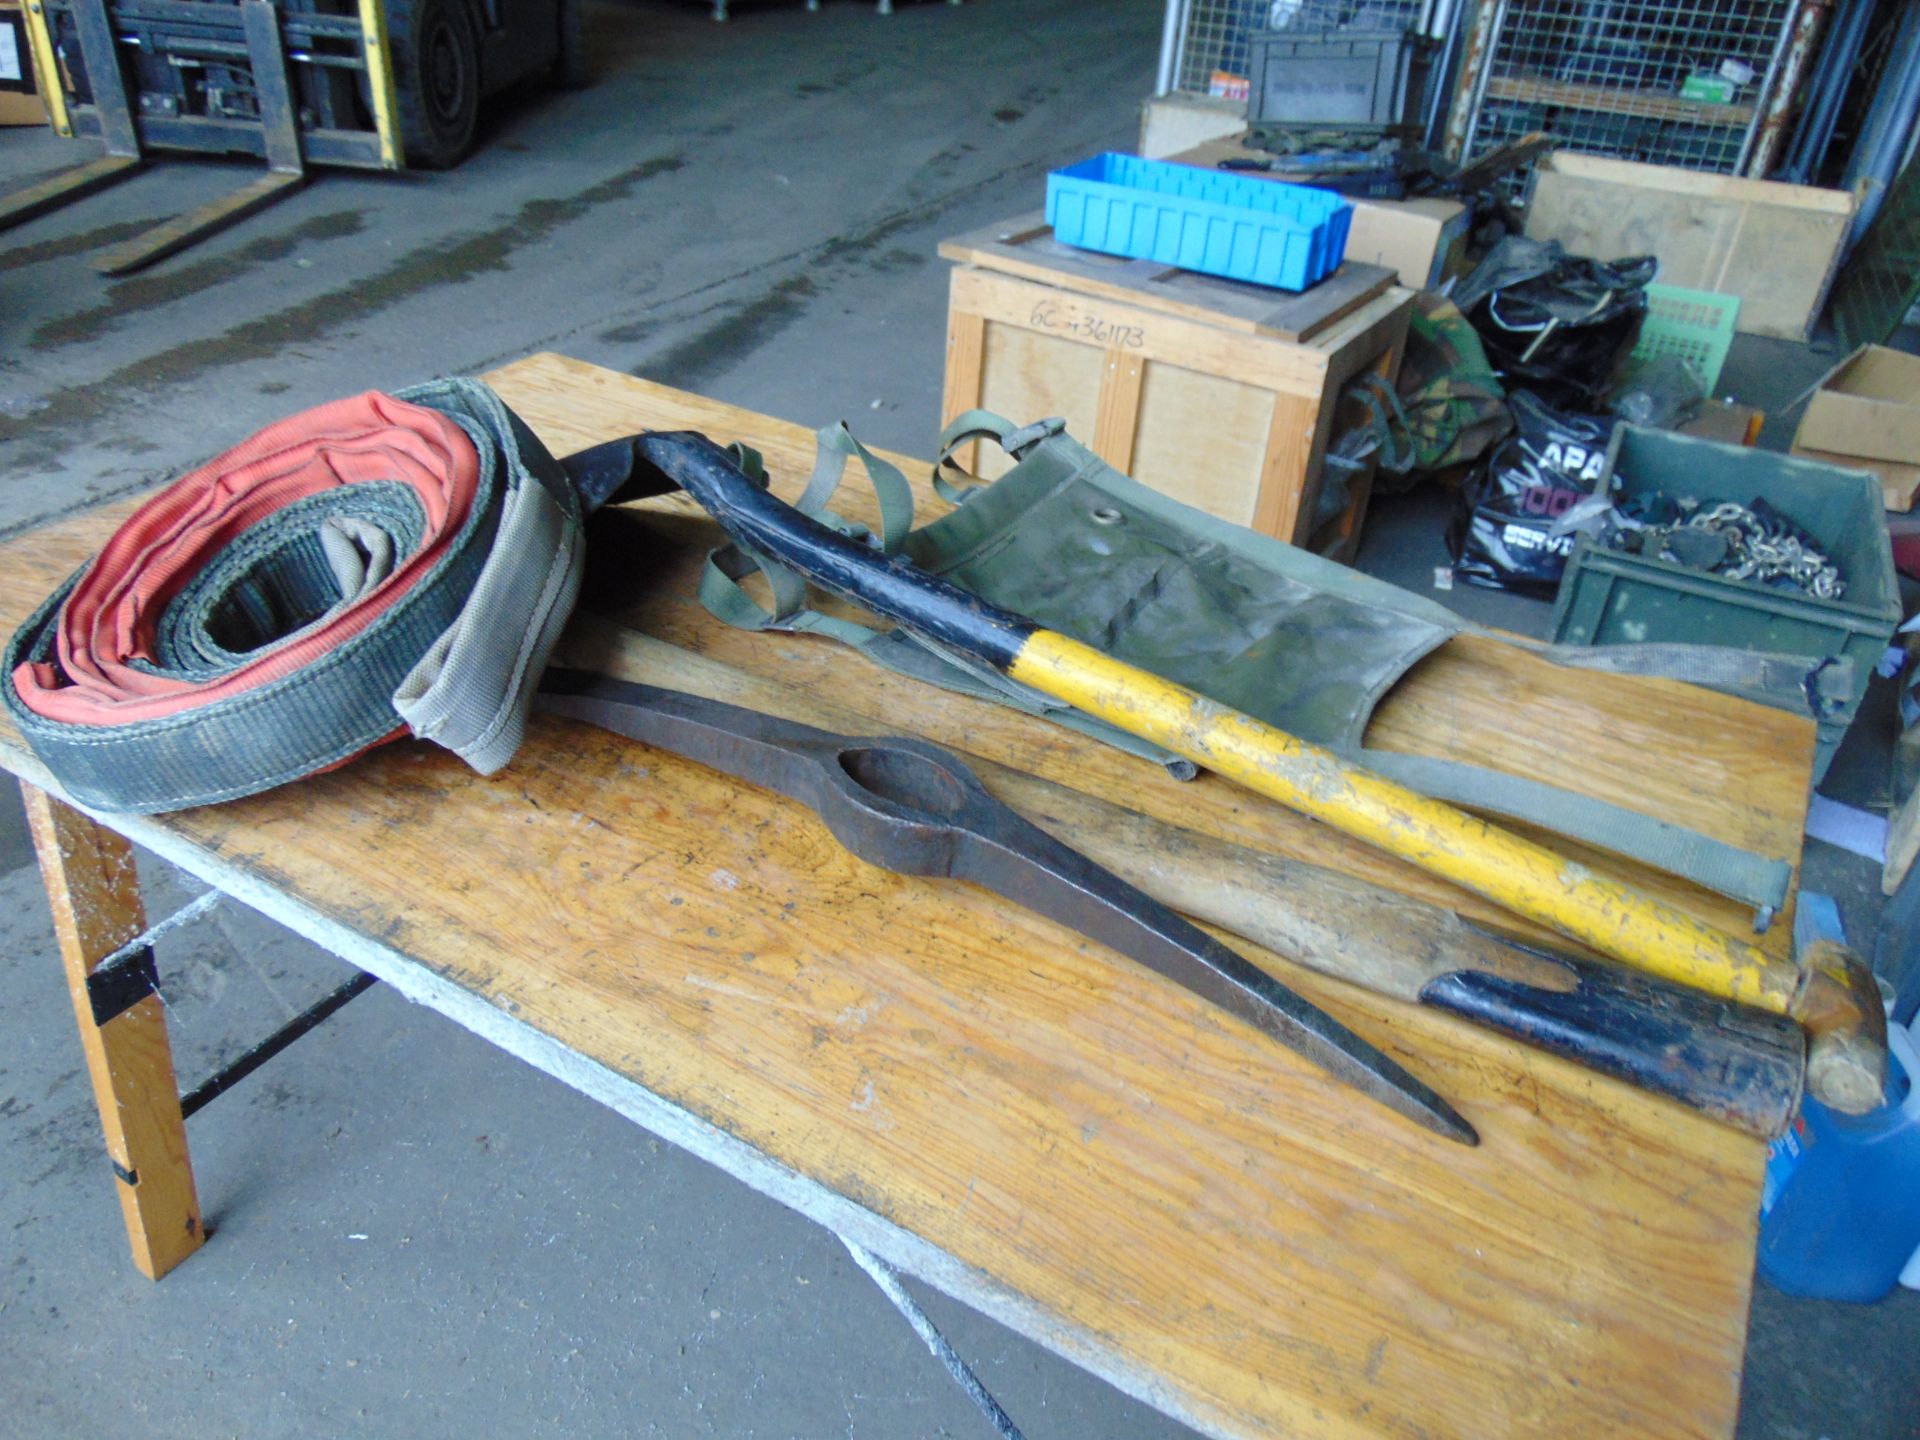 1 Set of Land Rover Wolf Pioneer Tools, Tow Rope, Spare Wheel Carrier and Manual - Image 2 of 7